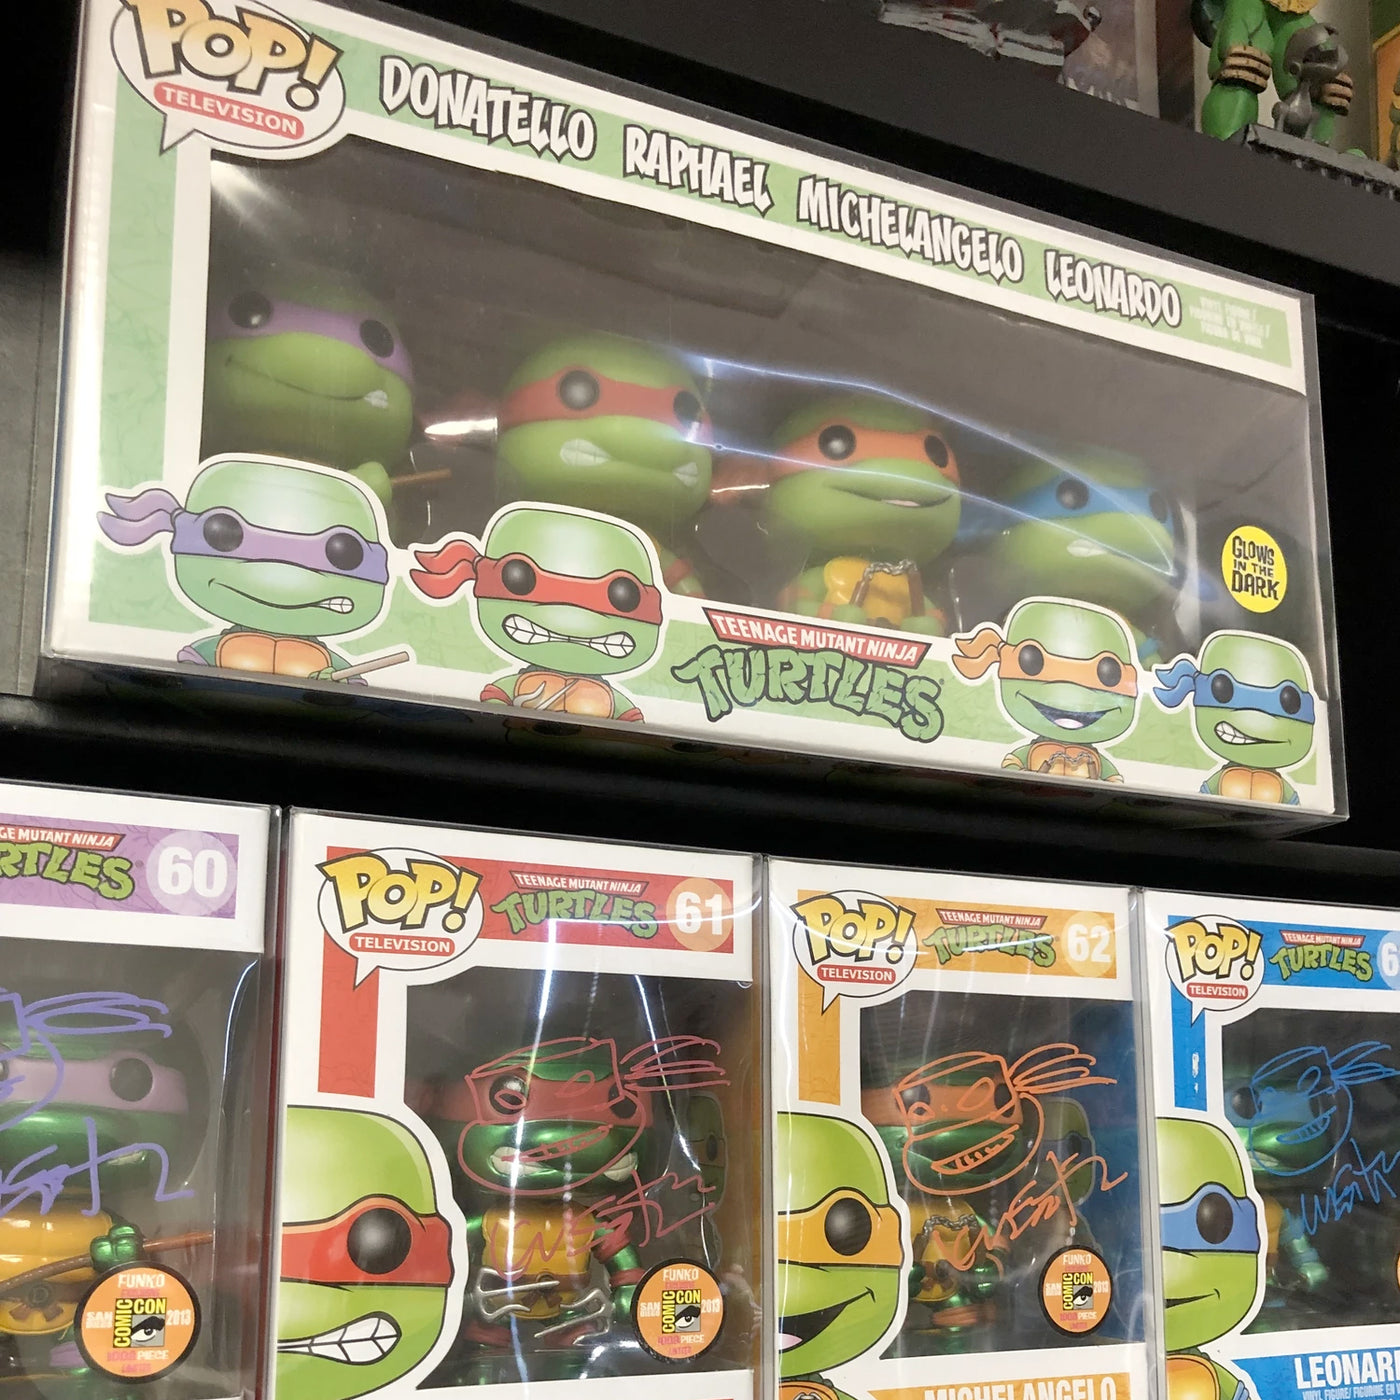 teenage mutant ninja turtles gitd 4 pack best funko pop protectors thick strong uv scratch flat top stack vinyl display geek plastic shield vaulted eco armor fits collect protect display case kollector protector